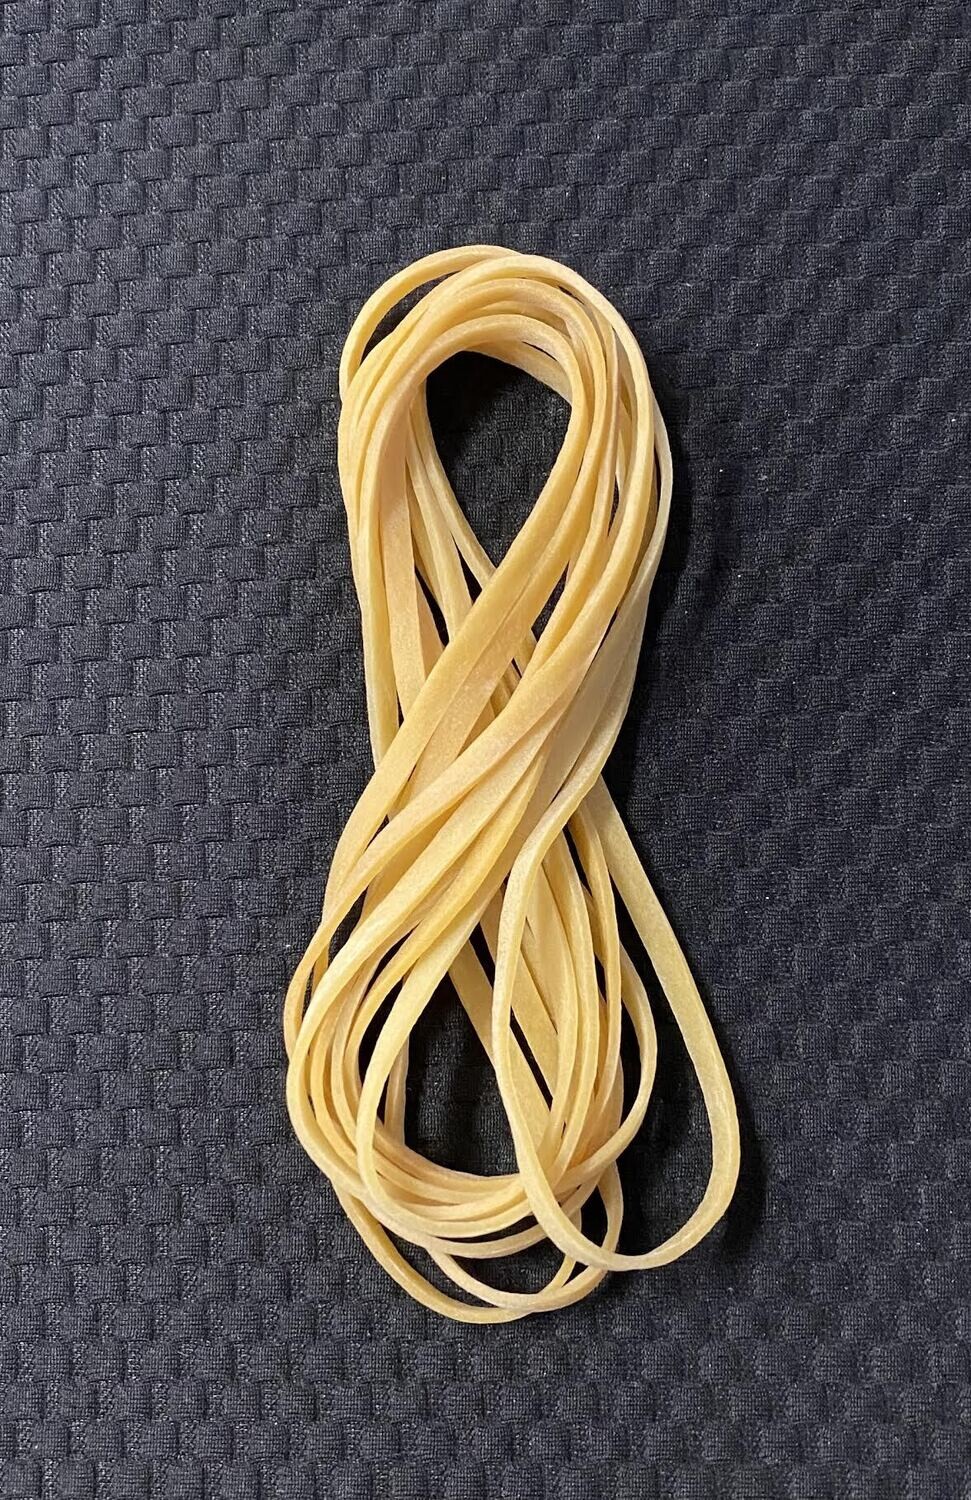 Replacement Rubber Bands ( 10 rubber bands)